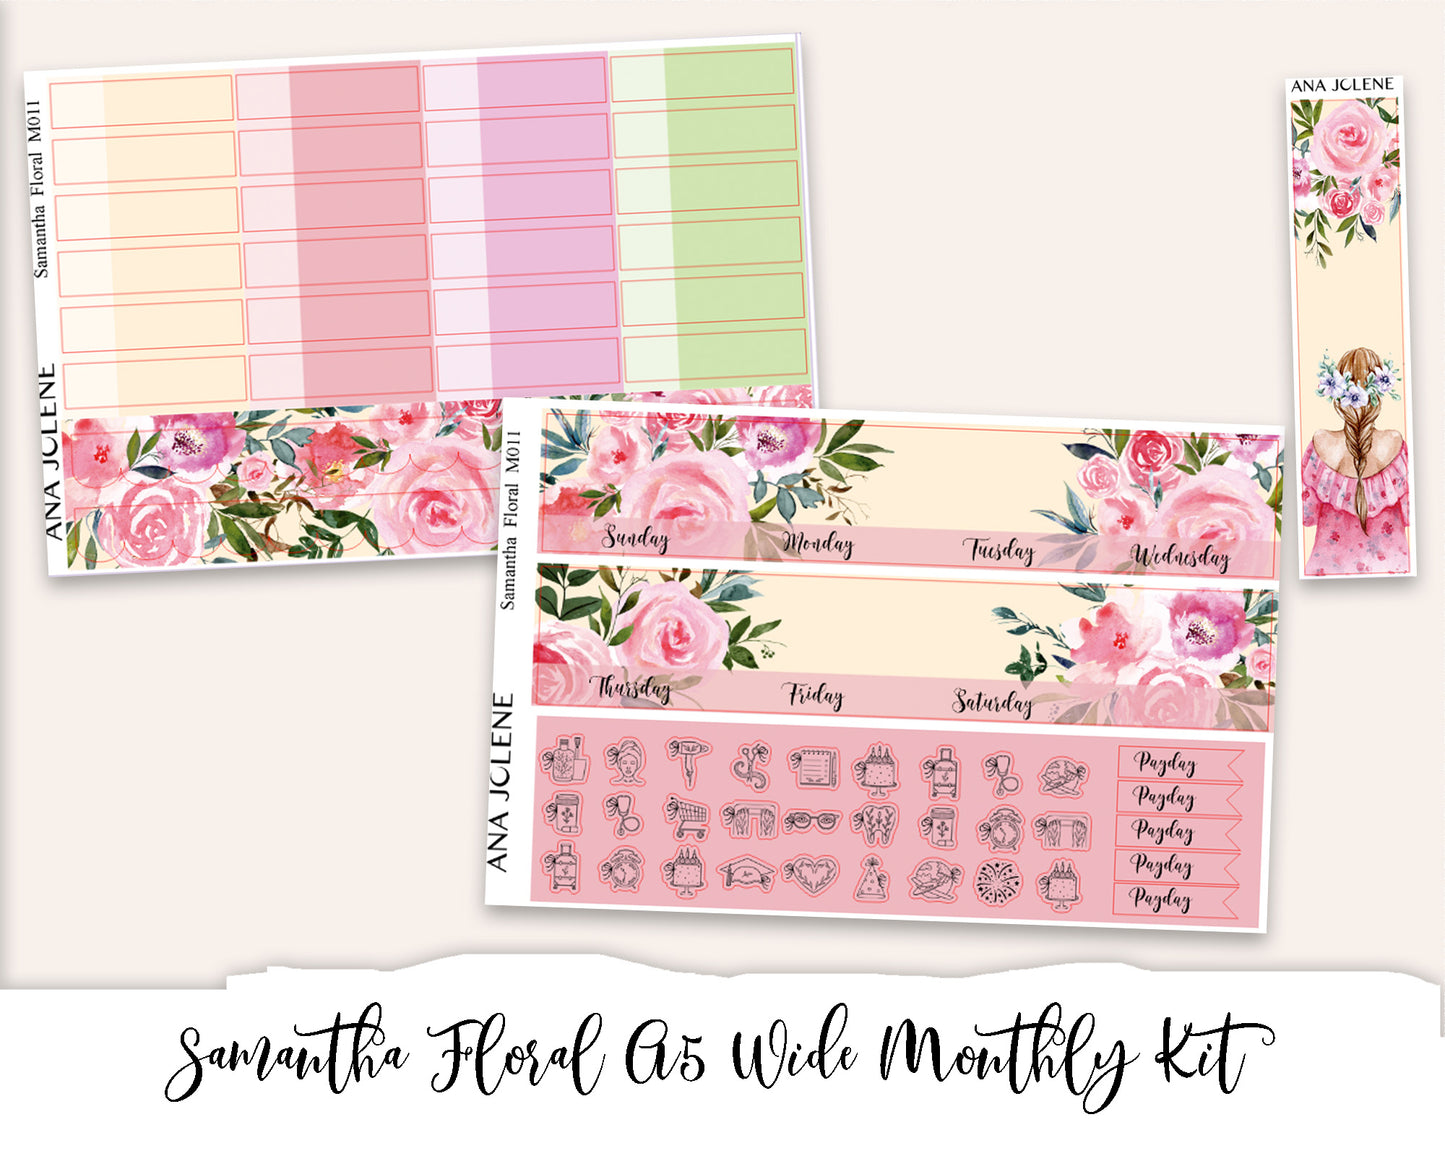 Monthly Kits for A5Wide inserts Bundle 2